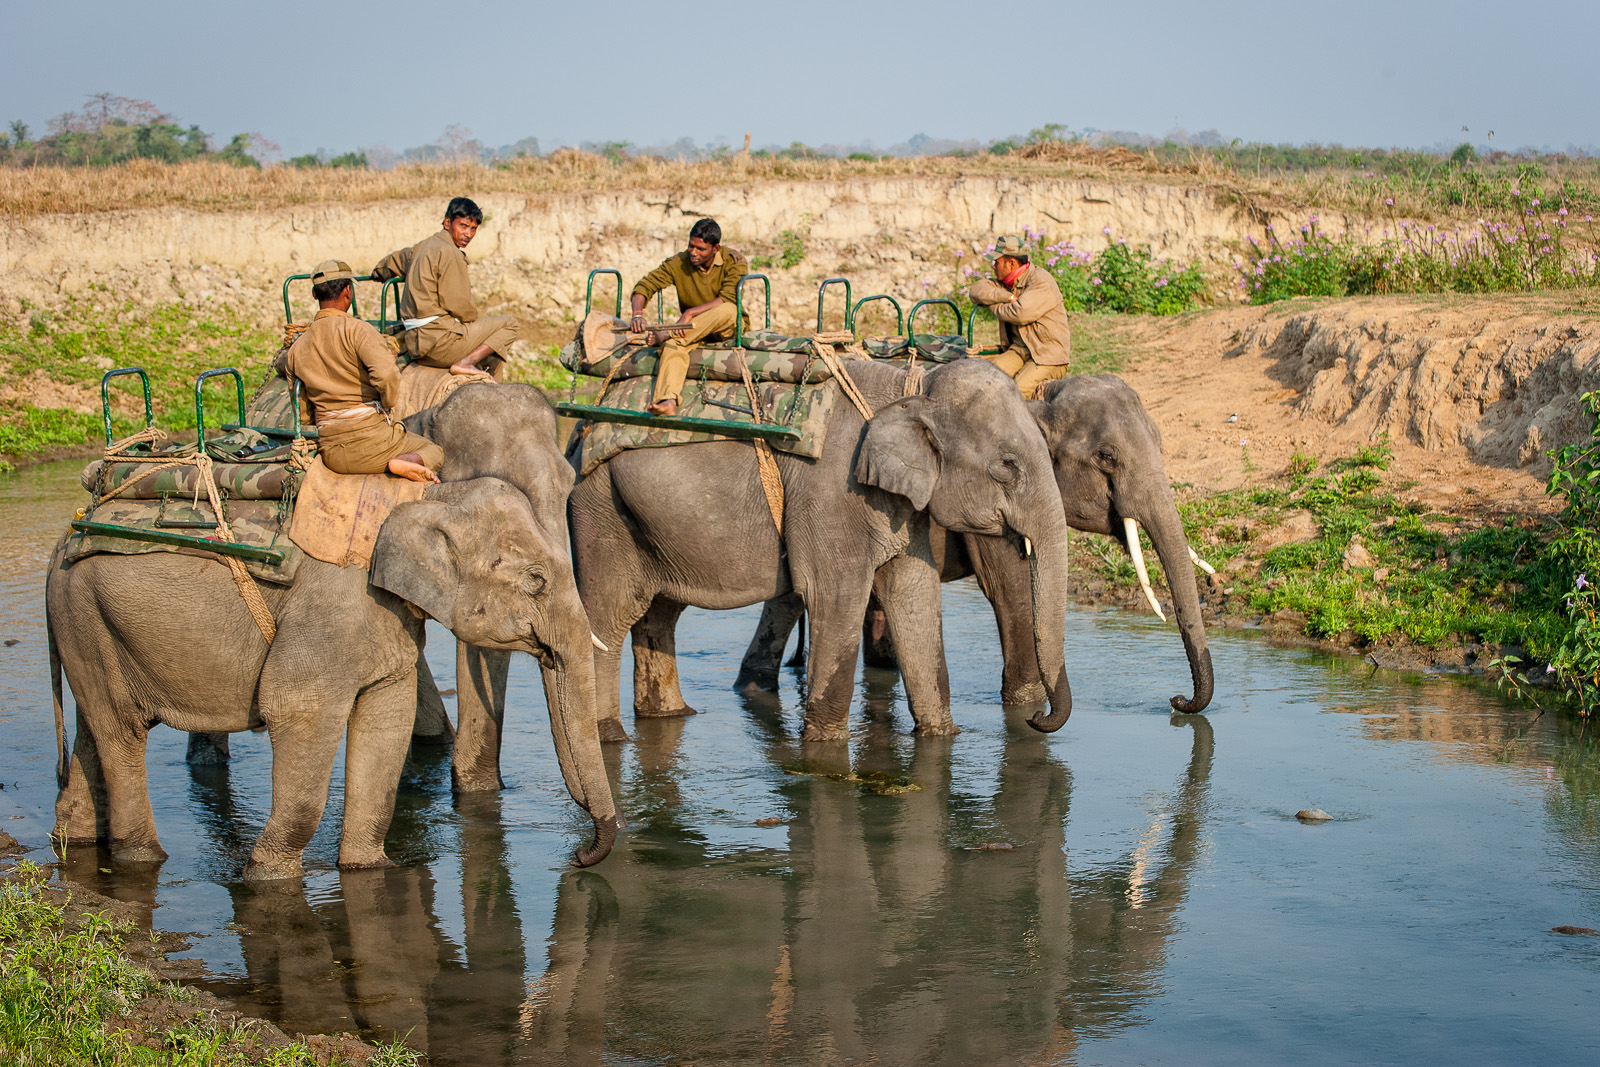 Mahouts take their elephants to water after the rhino safari, Assam, India